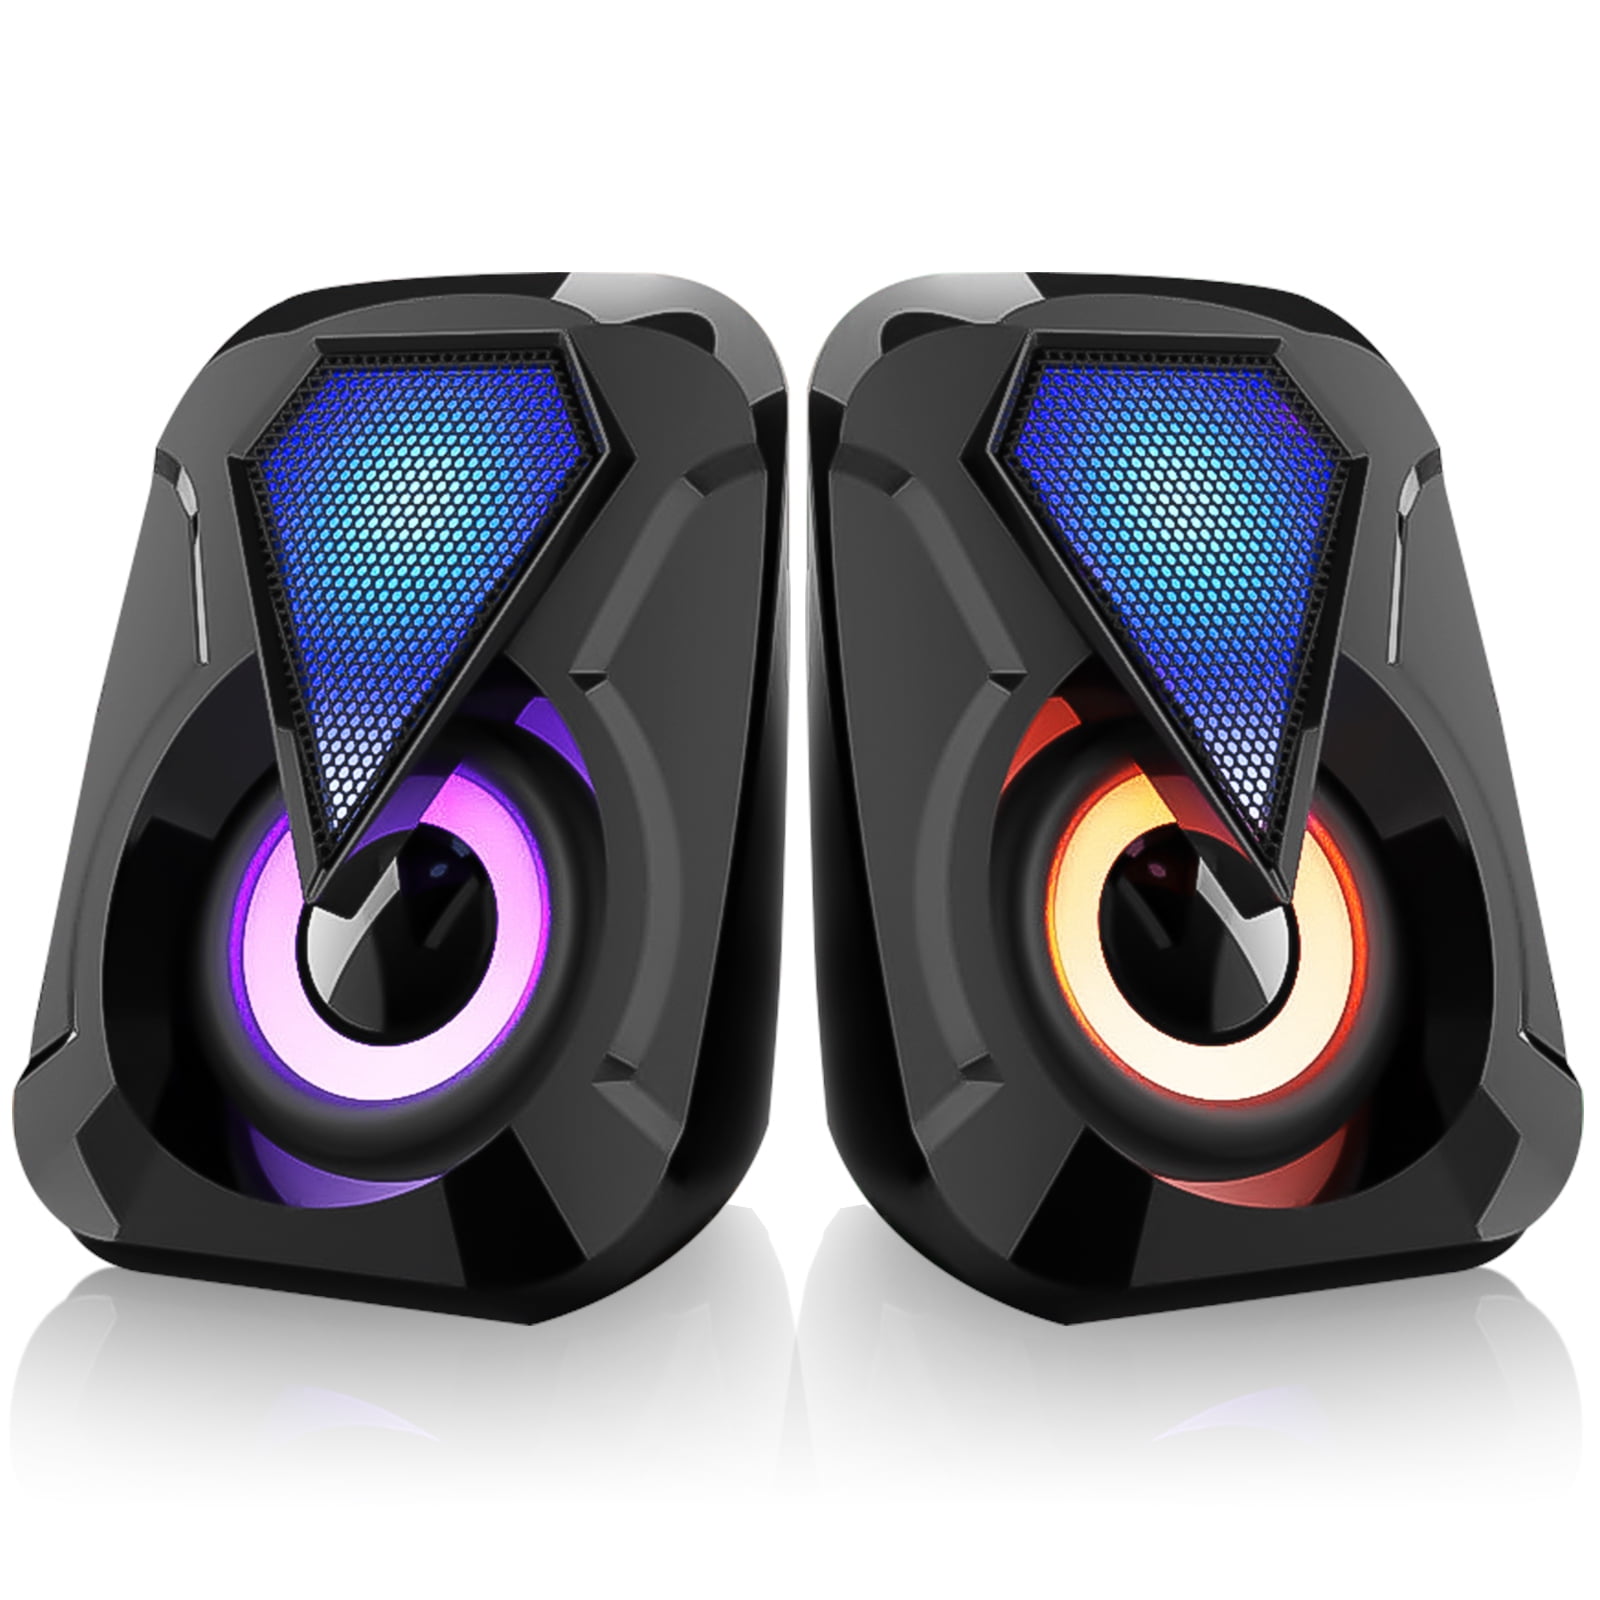 PC Gaming Speakers 16W USB Wired RGB Computer Speakers with Enhanced Stereo 6-Modes Colorful LED Light Dual-Channel Desktop Speakers for Tablet Computer Laptop Smartphones MP4 MP3 8Wx2